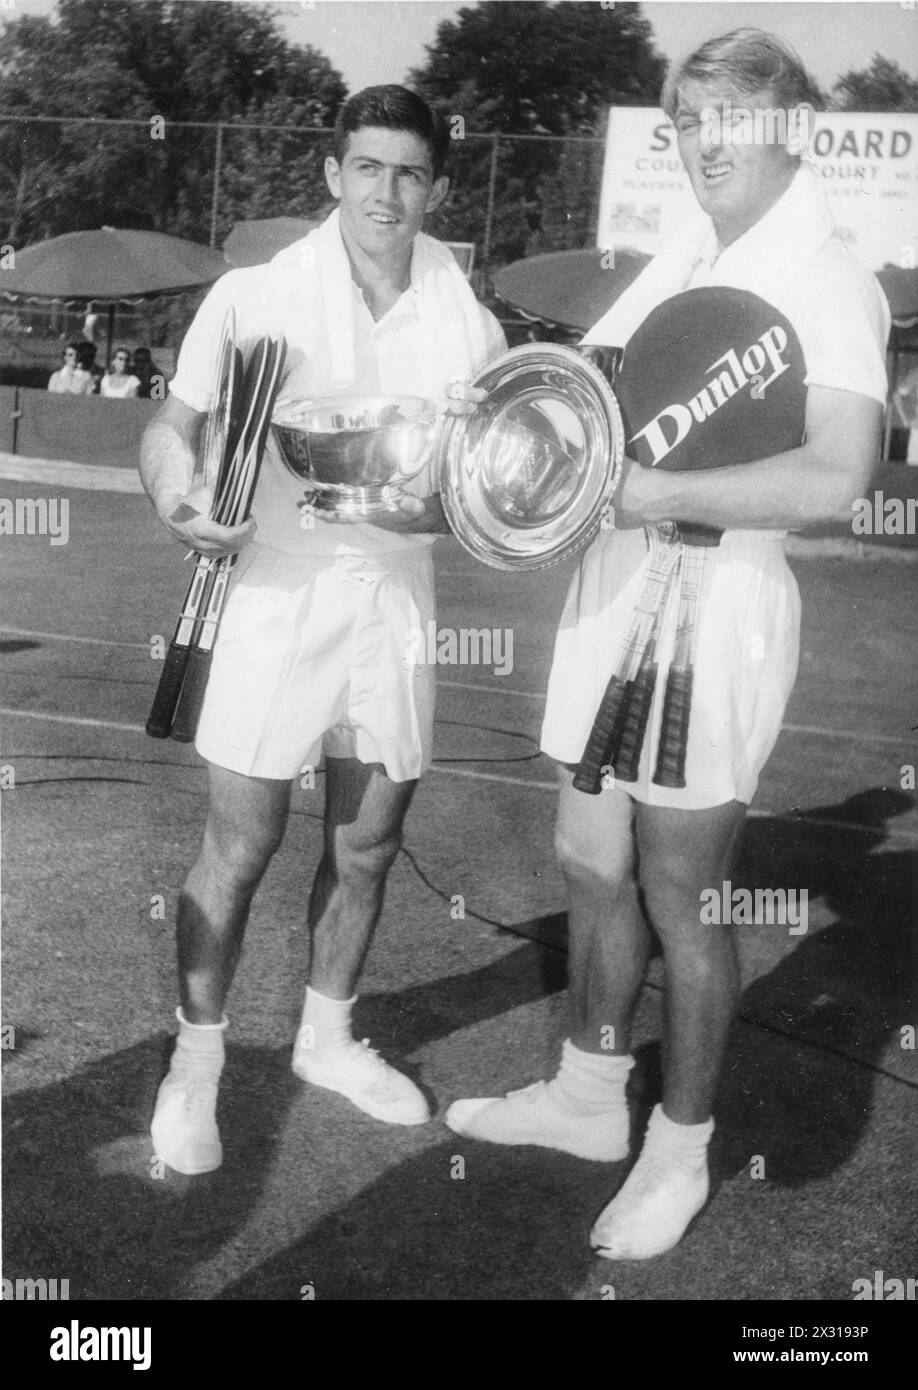 Hoad, lewis 'Lew', 23.11.1934 - 3,7.1994, australischer Tennisspieler, mit KS Rosewall (links), ADDITIONAL-RIGHTS-CLEARANCE-INFO-NOT-AVAILABLE Stockfoto